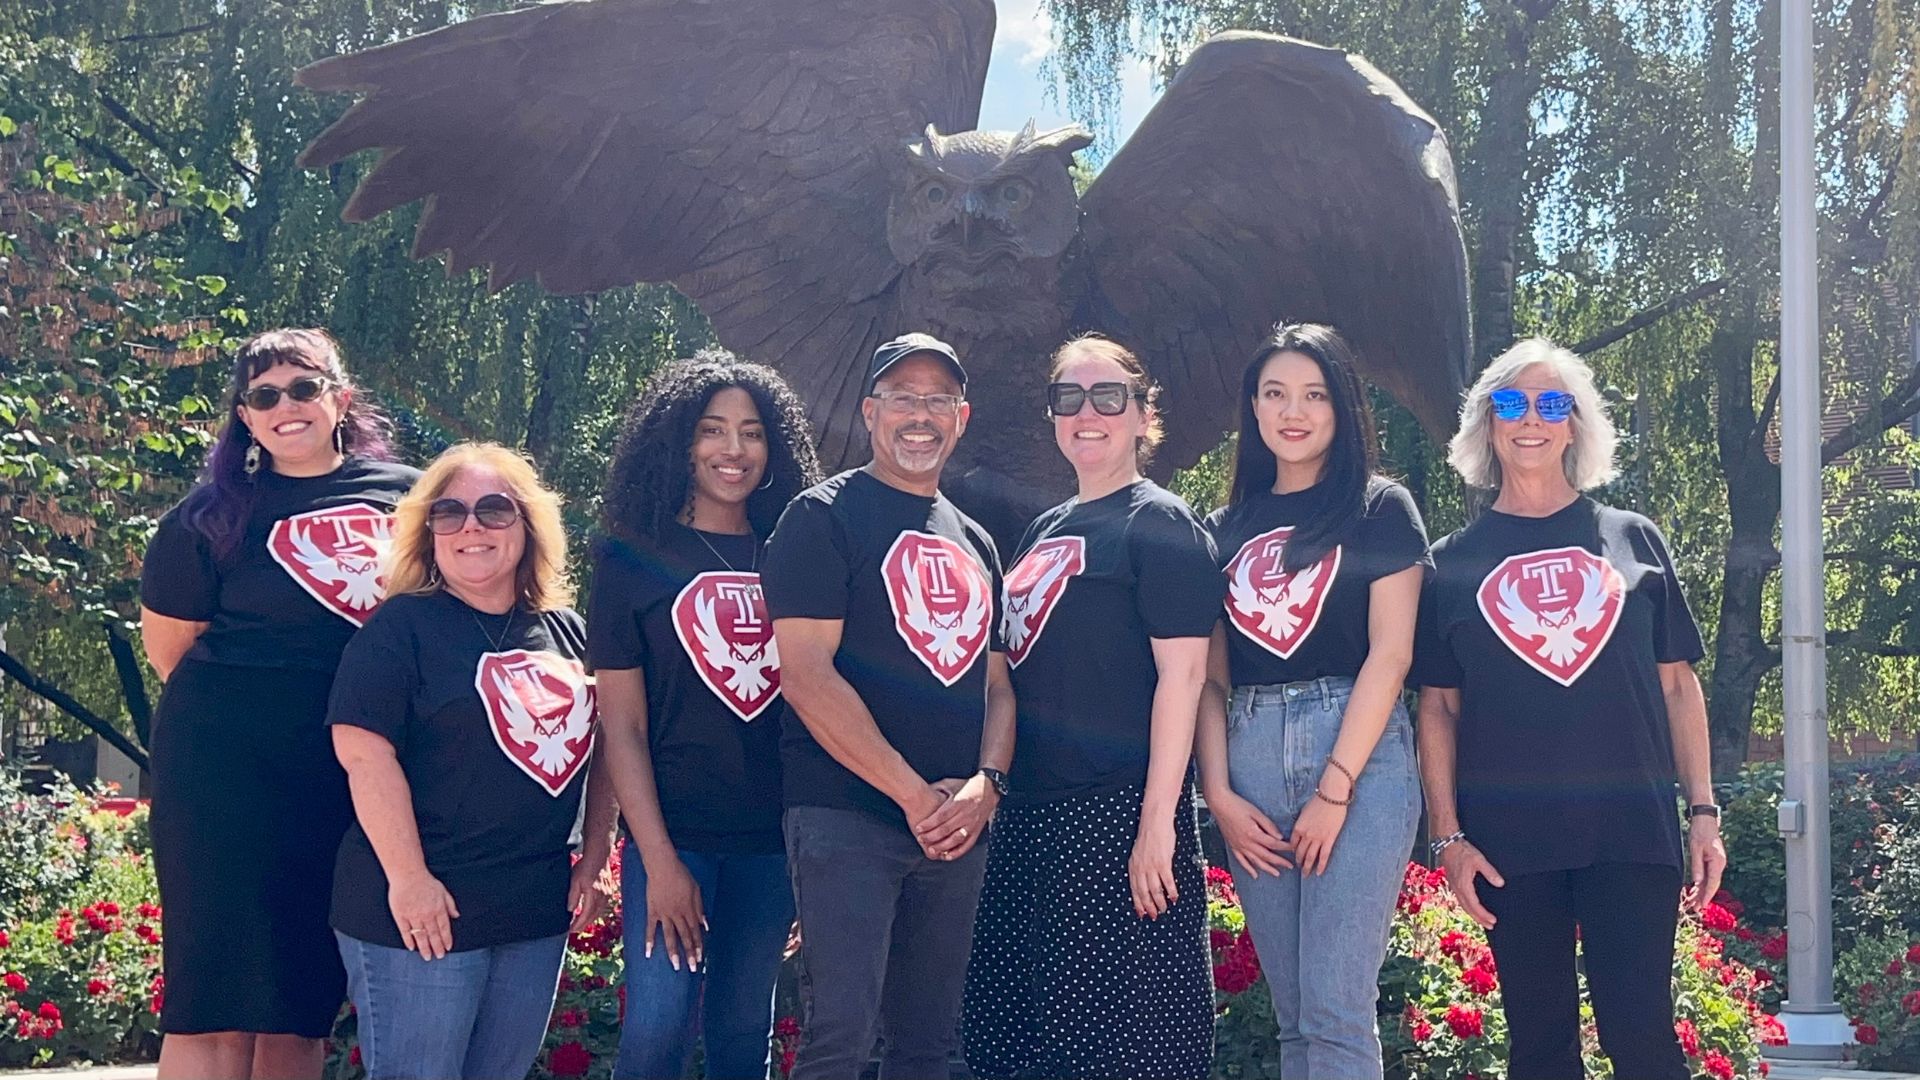 Members of the Office of Community, Communication and Events team (left to right): Tracy Agostarola, Dawn Ramos, Nia Davis, David W. Brown, Amanda Stankiewicz, Lucy Lu and Lisa Simon